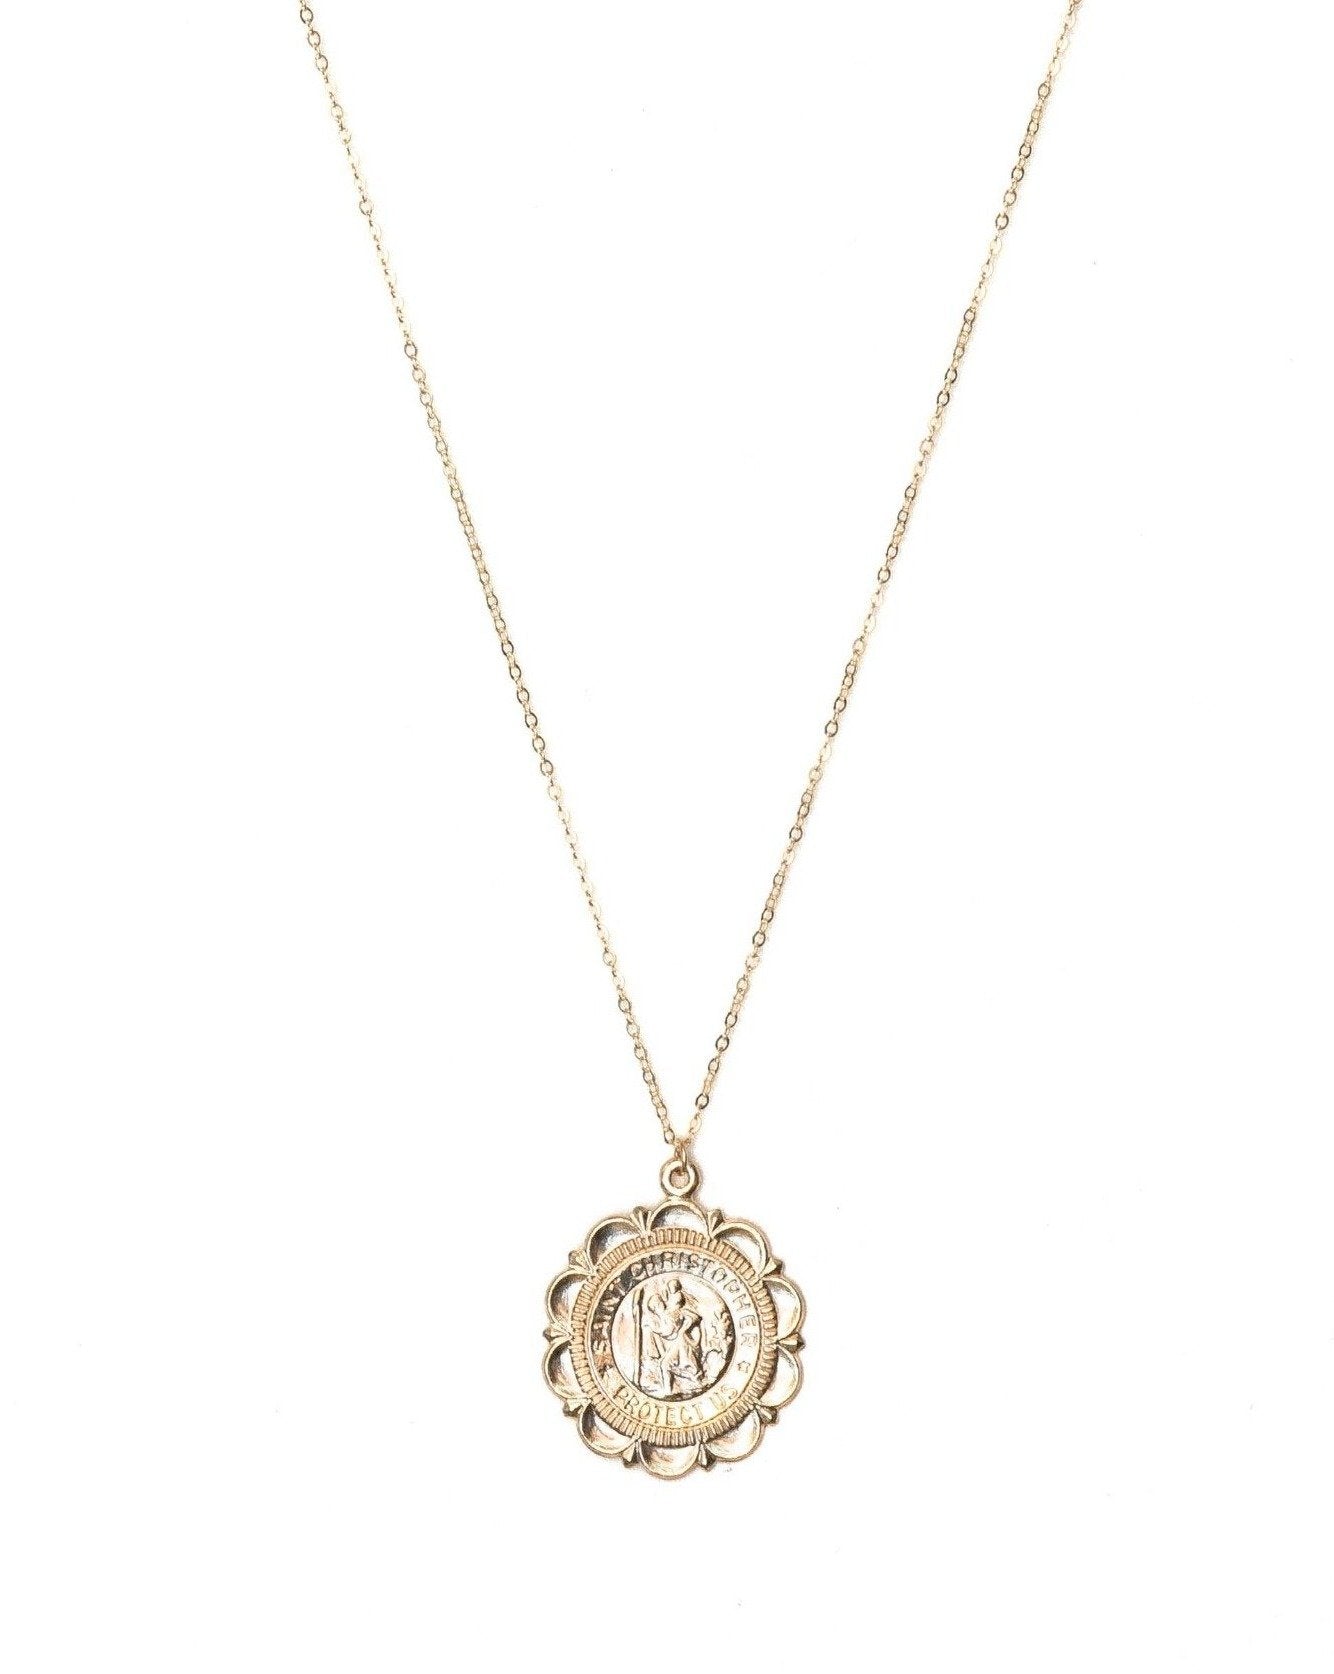 San Cris Long Necklace by KOZAKH. A 20 inches long necklace, crafted in 14K Gold Filled, featuring a 16mm Saint Christopher Medallion.